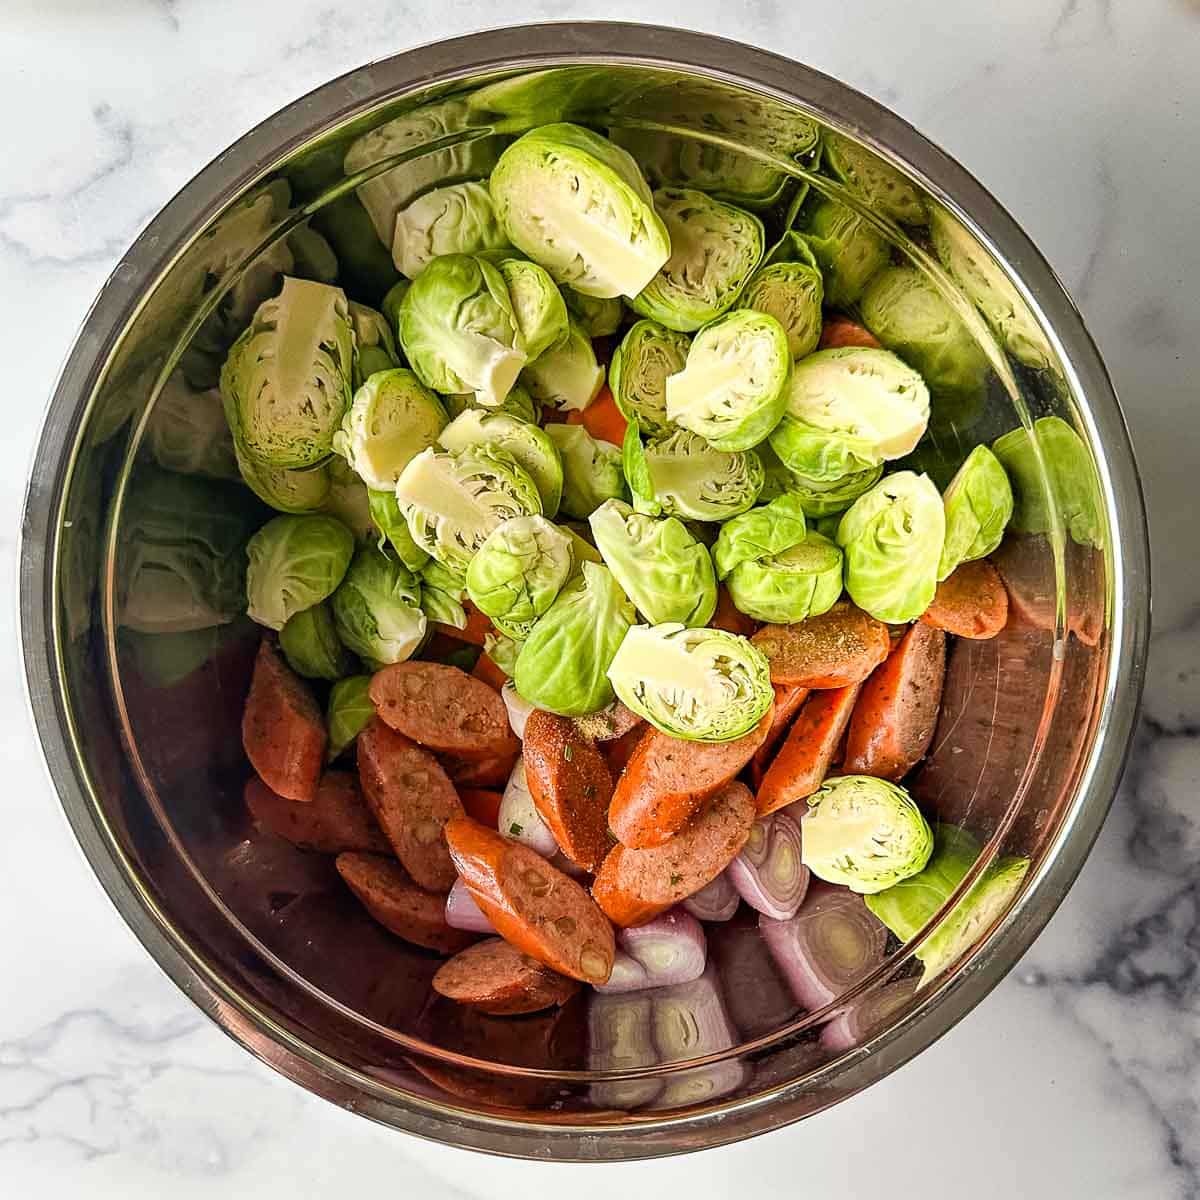 Brussels sprouts, sweet potatoes, shallots, and sausage in a metal bowl.